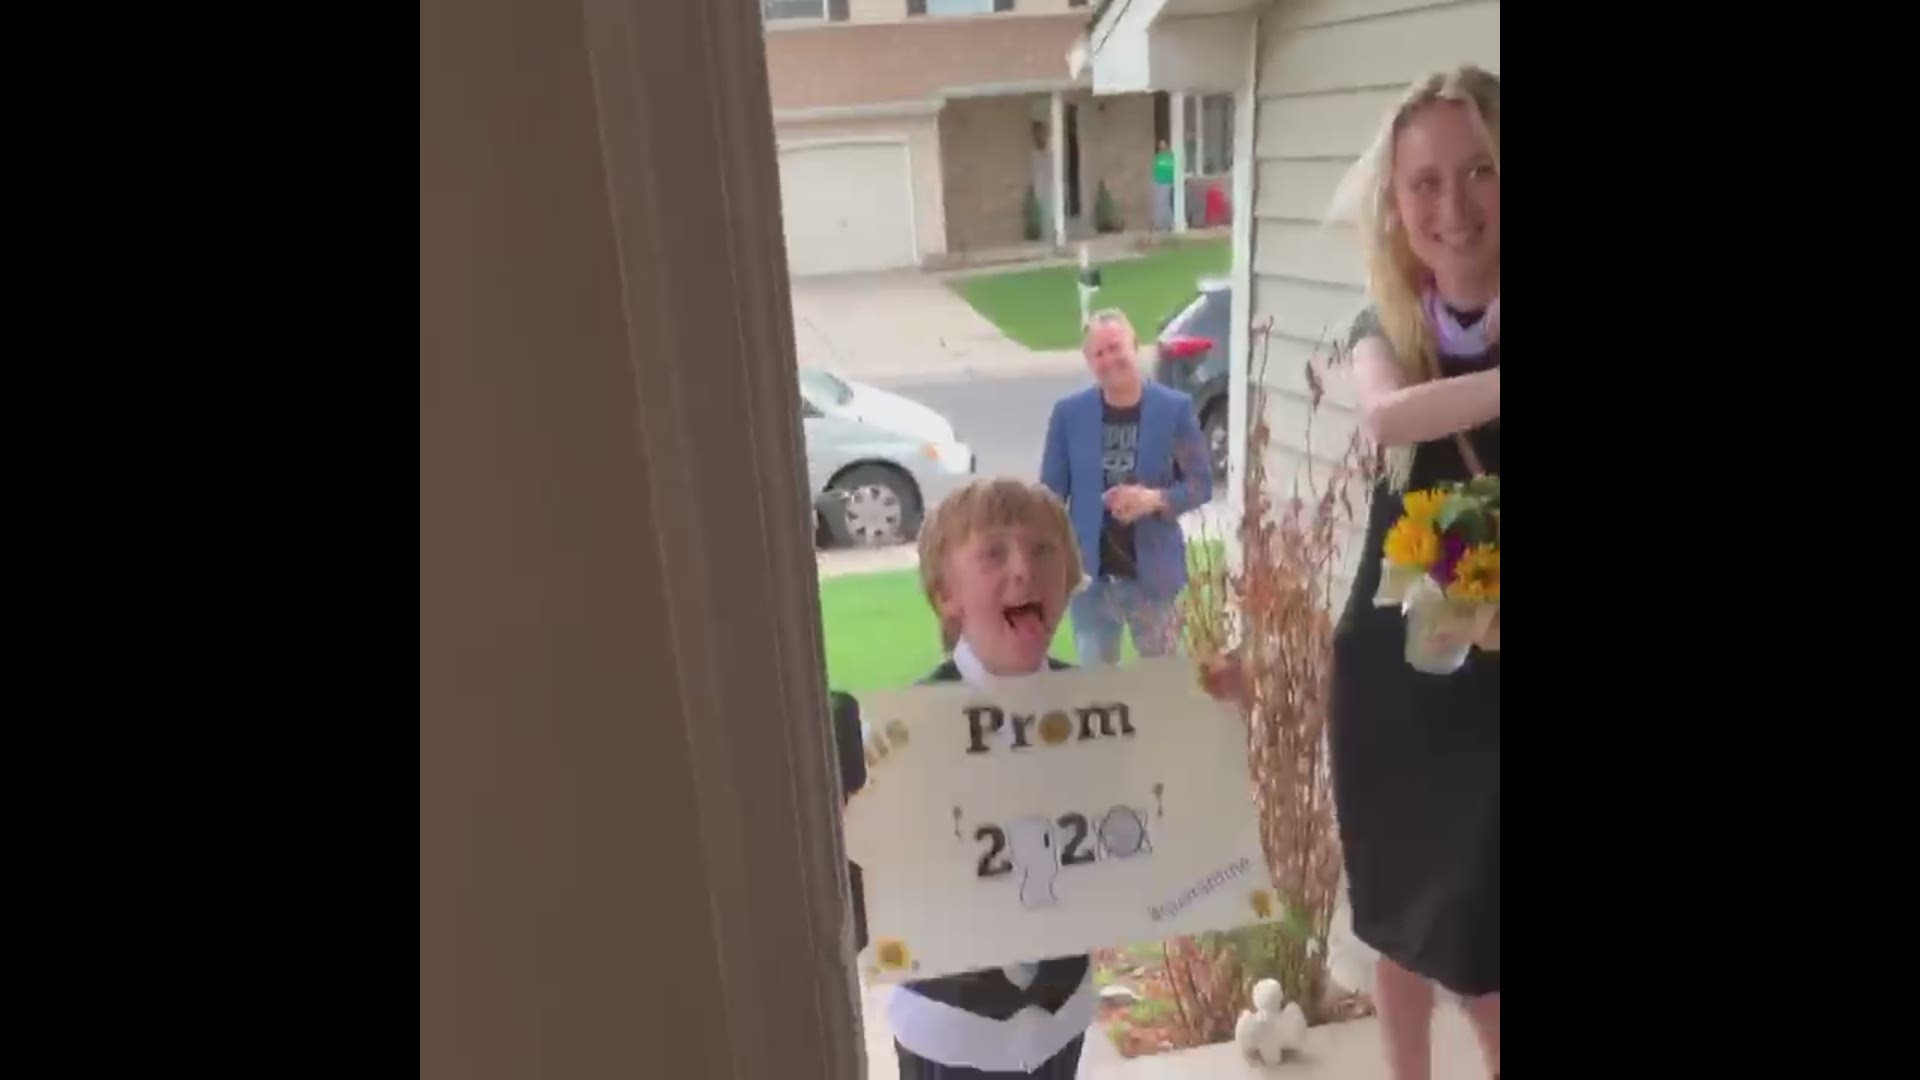 When big sister Rachel's prom was canceled due to the COVID-19 pandemic, Levi stepped up and surprised her with an at-home celebration.